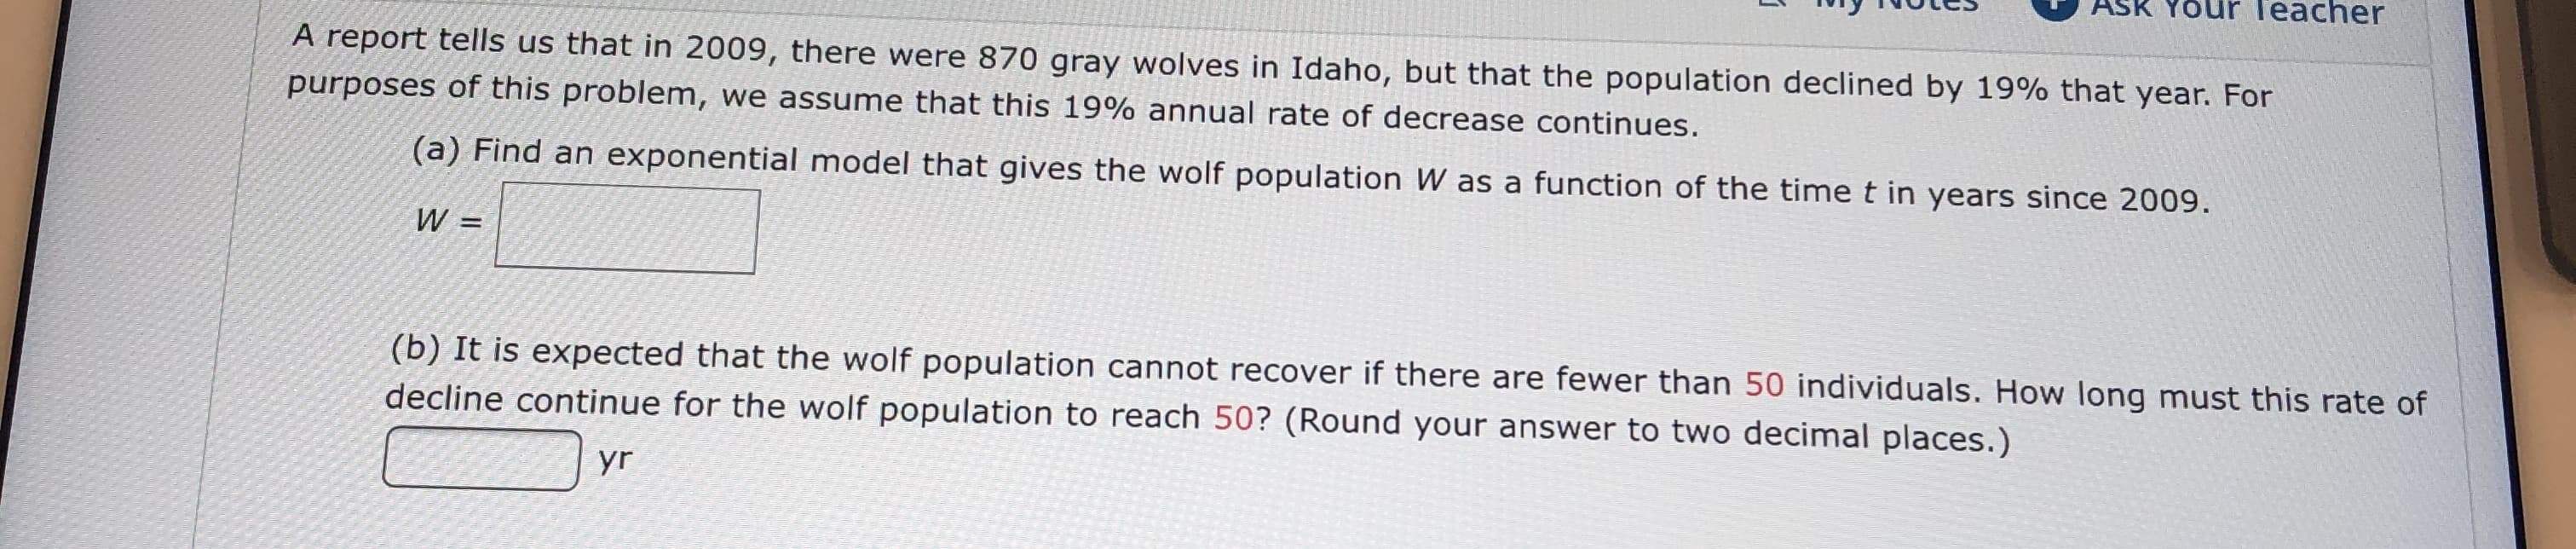 ASK YOUR Teacher
A report tells us that in 2009, there were 870 gray wolves in Idaho, but that the population declined by 19% that year. For
purposes of this problem, we assume that this 19% annual rate of decrease continues.
(a) Find an exponential model that gives the wolf population W as a function of the time t in years since 2009
W =
(b) It is expected that the wolf population cannot recover if there are fewer than 50 individuals. How long must this rate of
decline continue for the wolf population to reach 50? (Round your answer to two decimal places.)
yr
